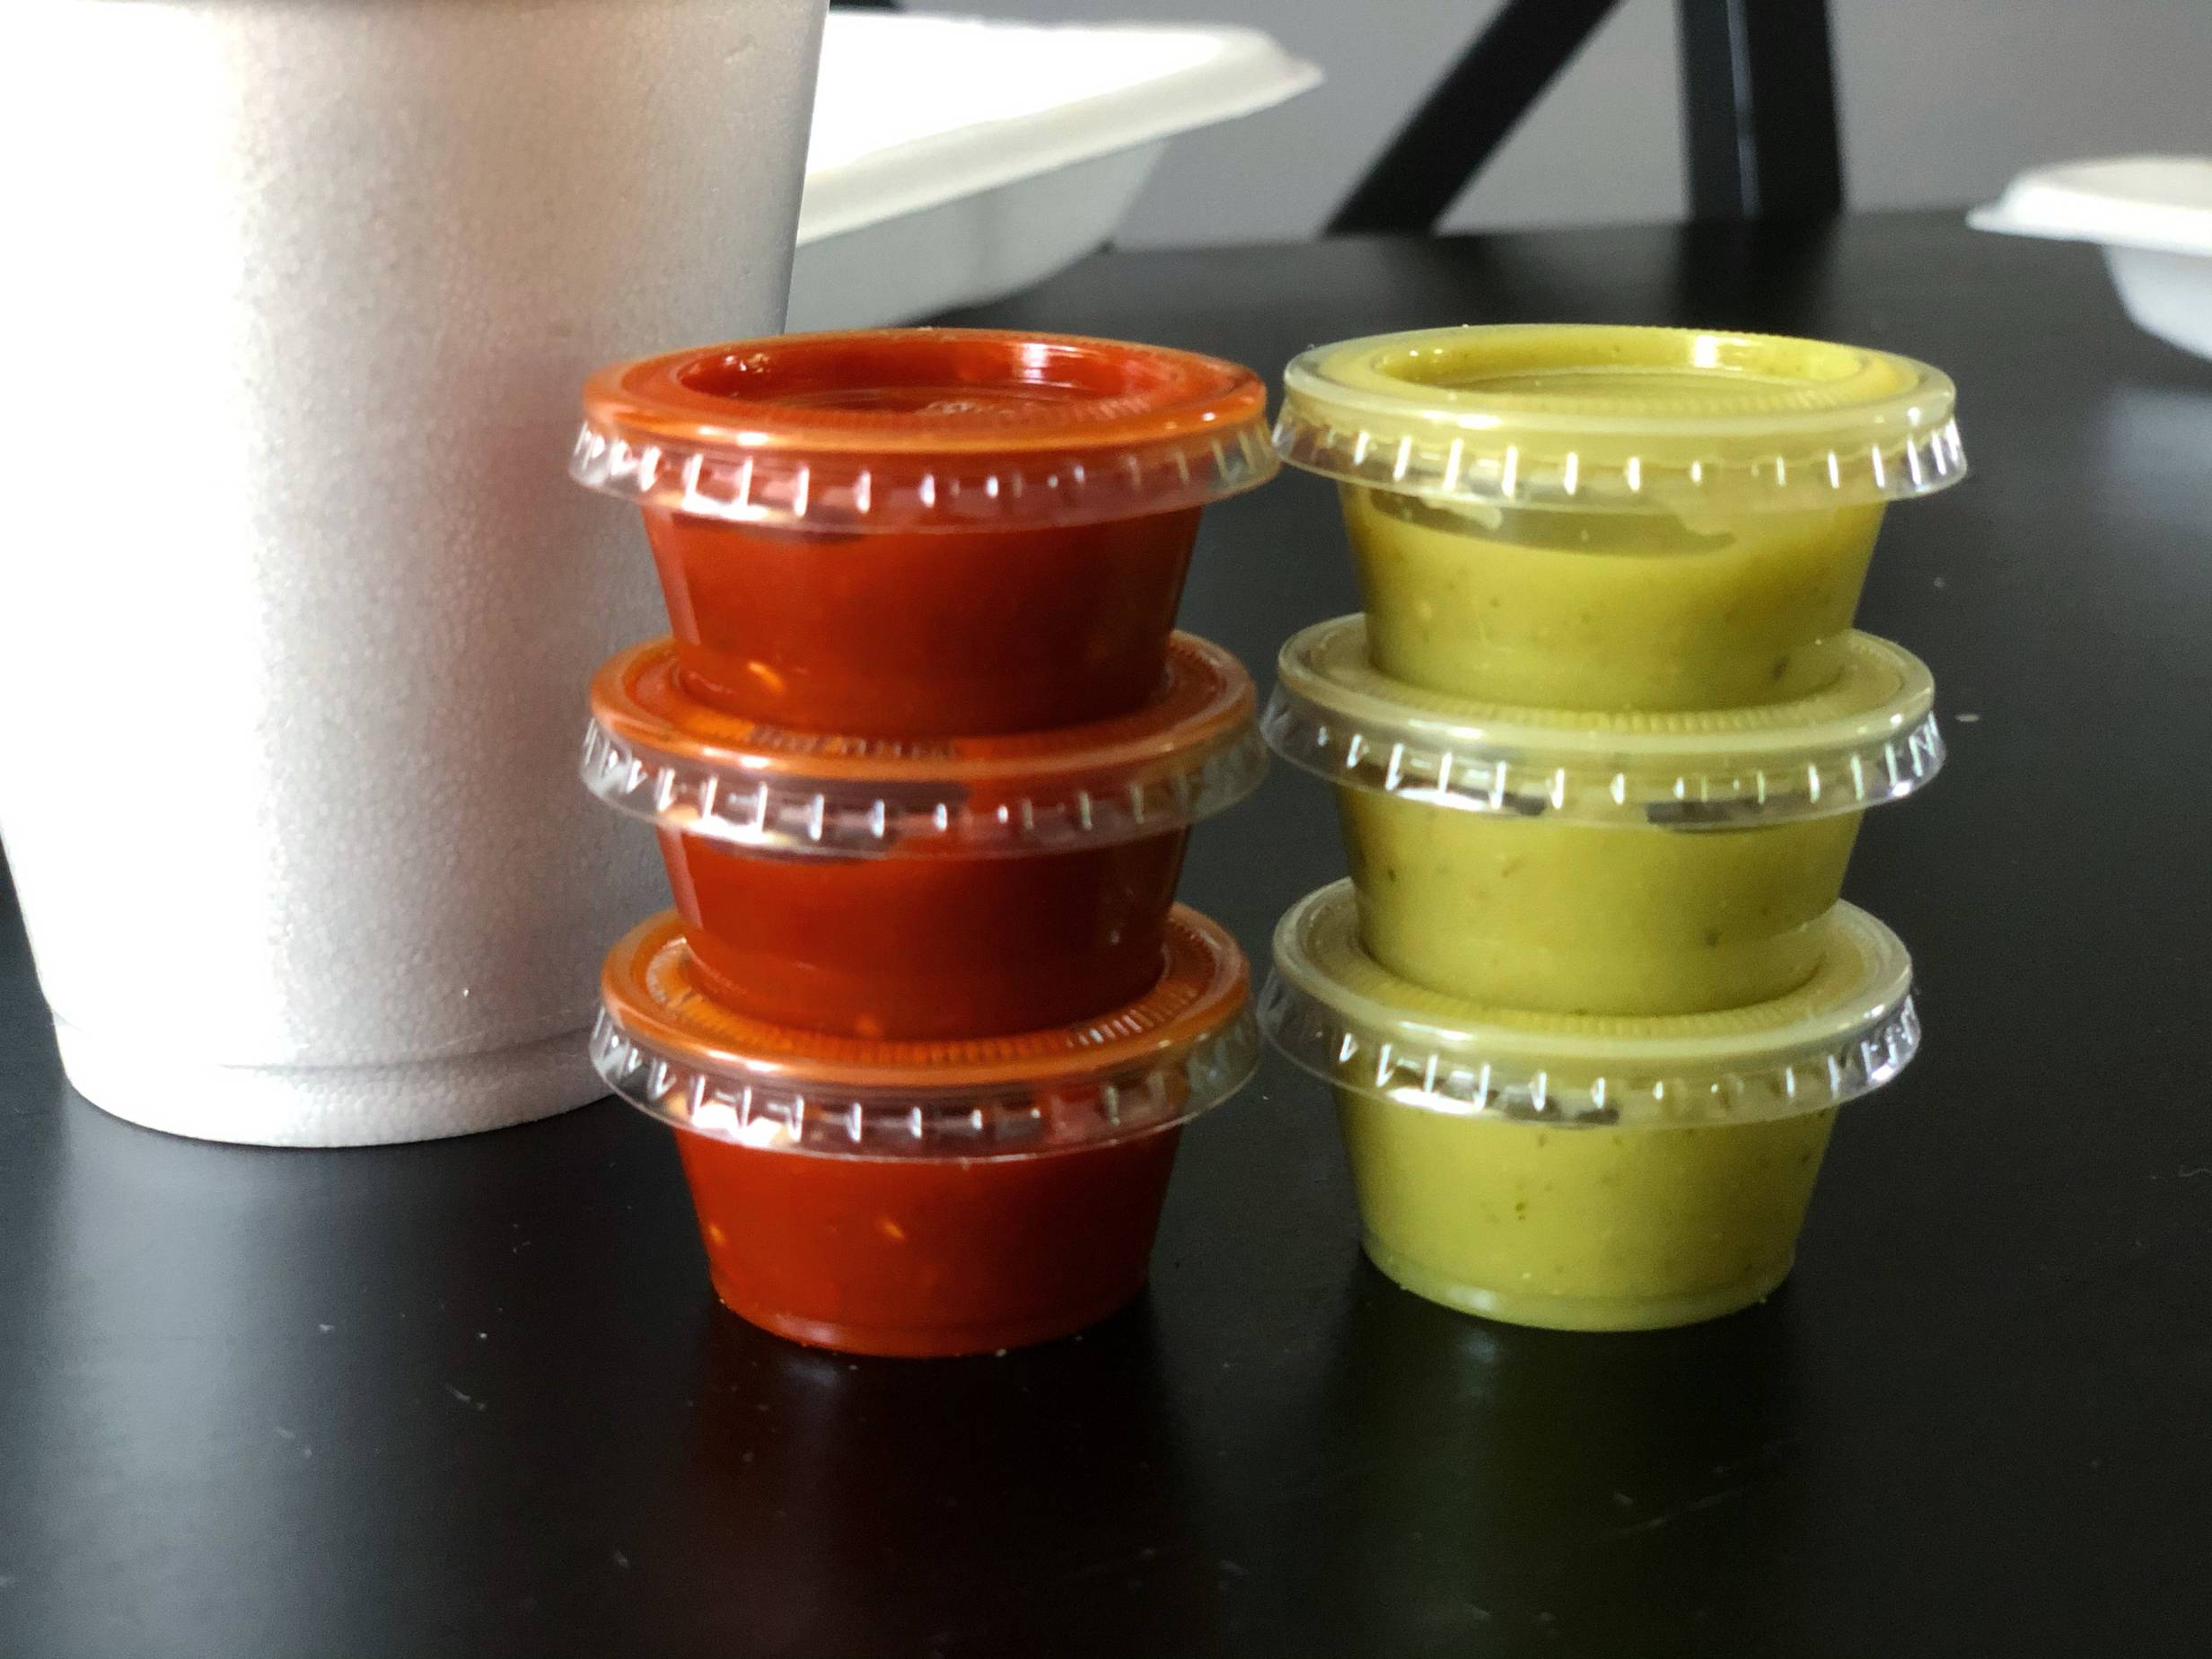 A tower of three small cups of red salsa stands next to a tower of three small cups of green salsa. Photo by Alyssa Buckley.